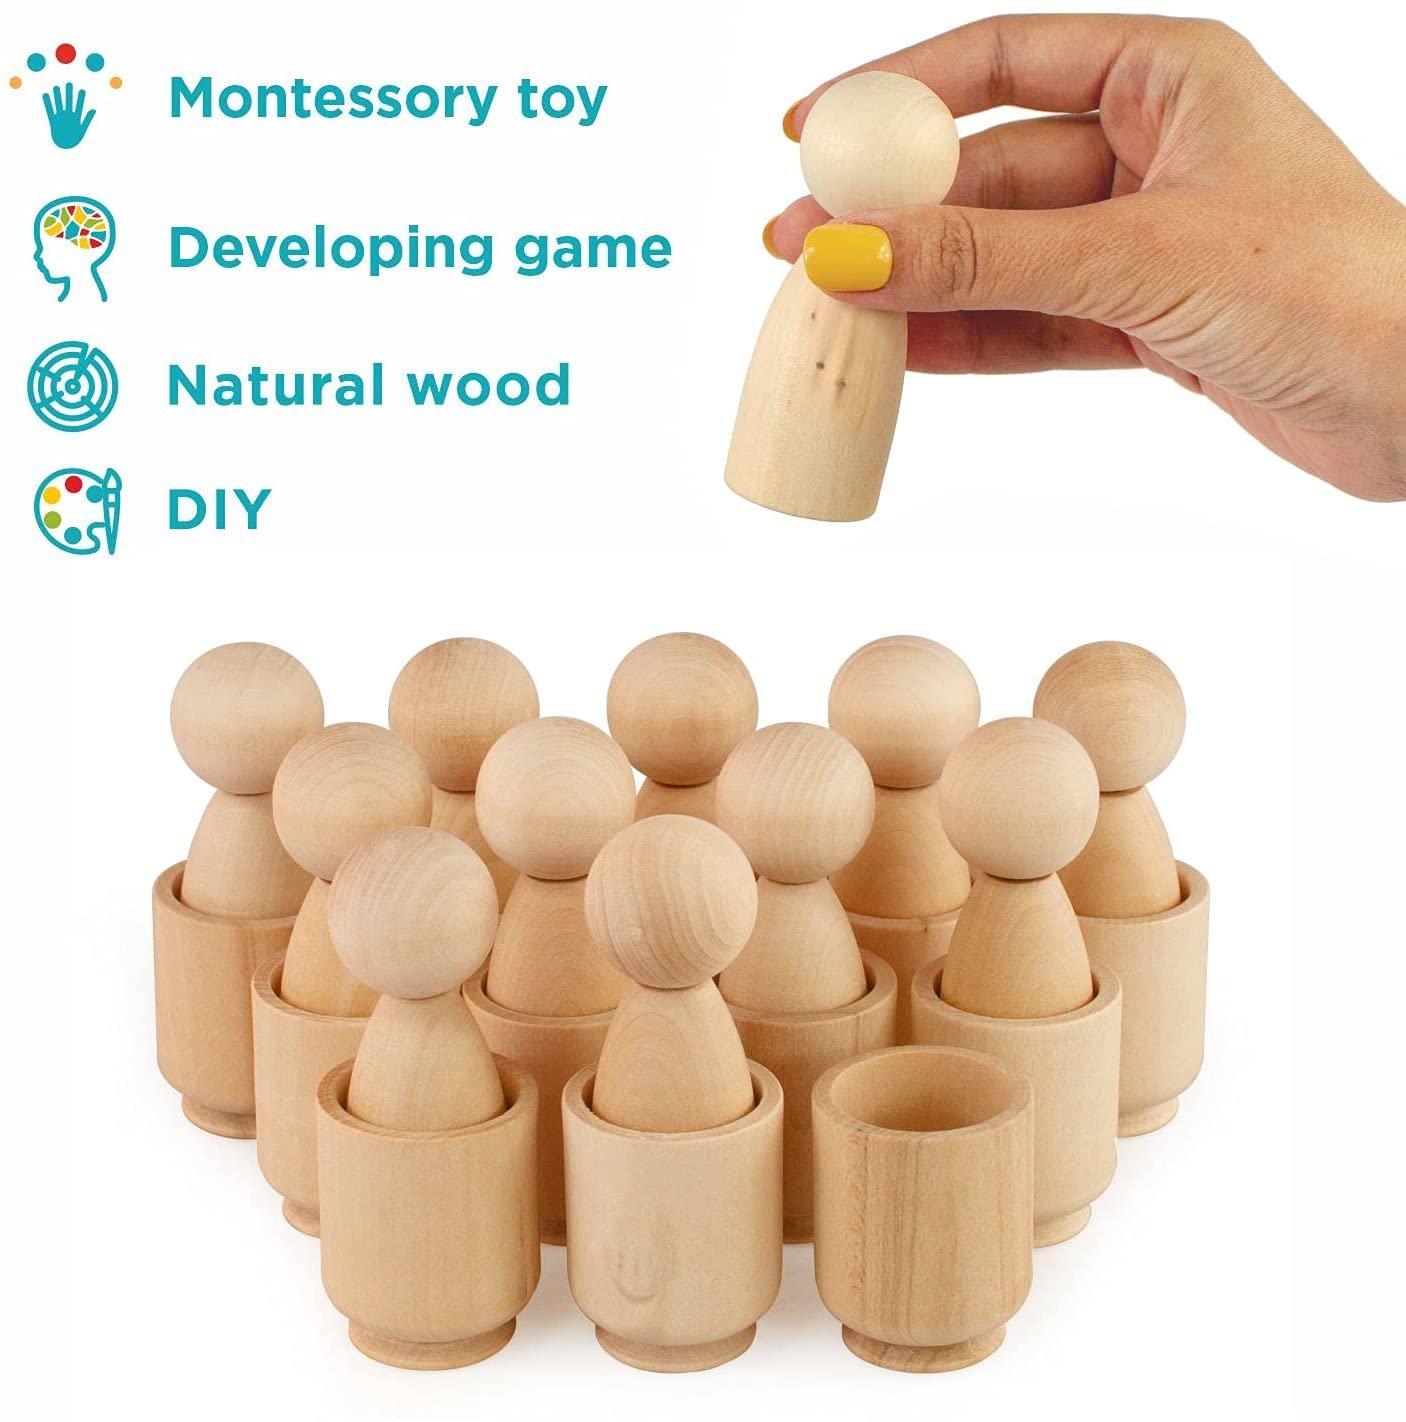 DIY Unpainted Peg Dolls in Cups 12 Gnomes 85 mm